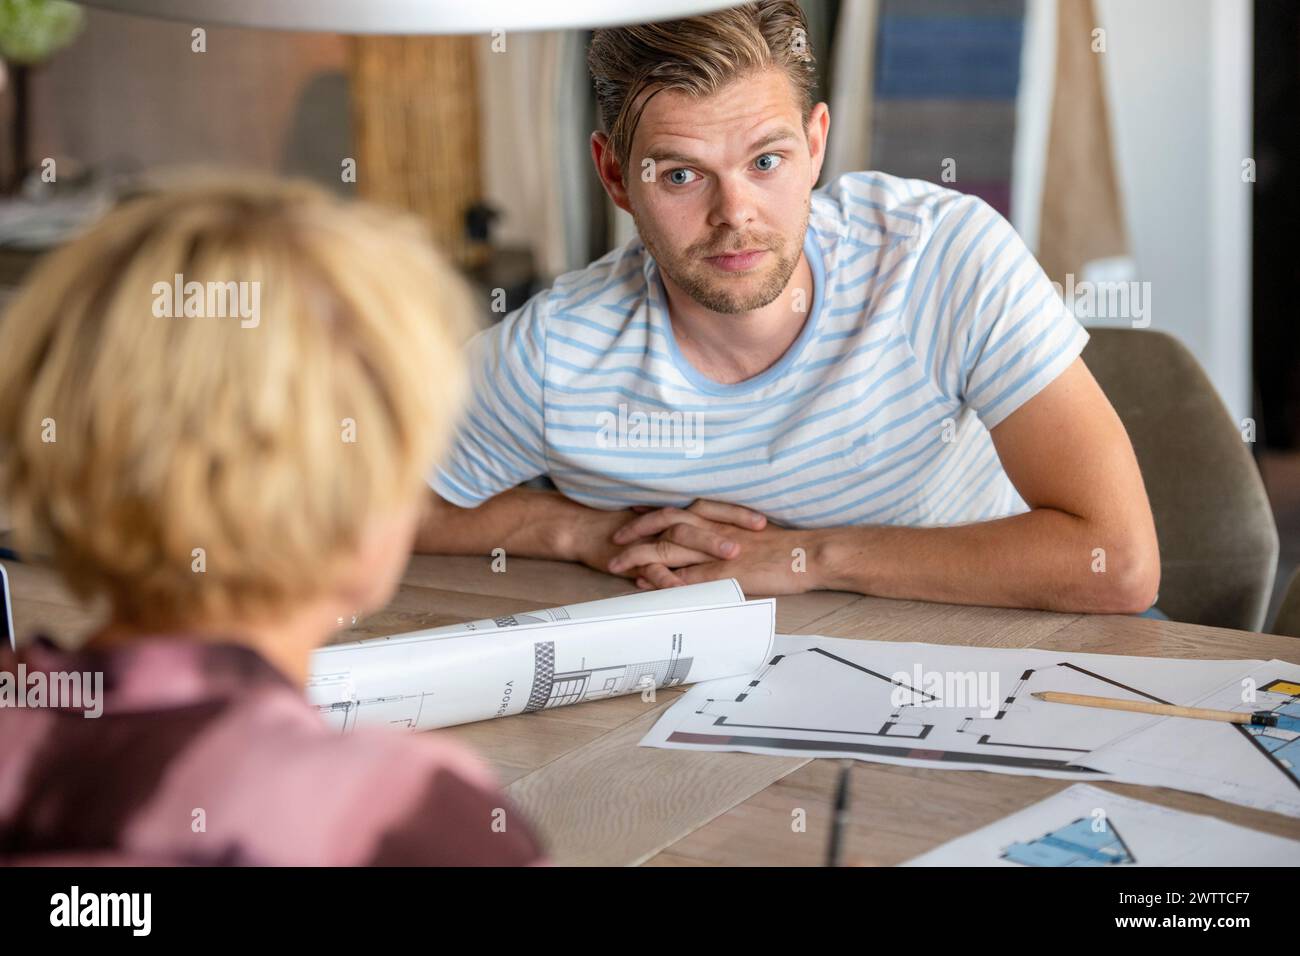 Focused conversation over architectural plans Stock Photo